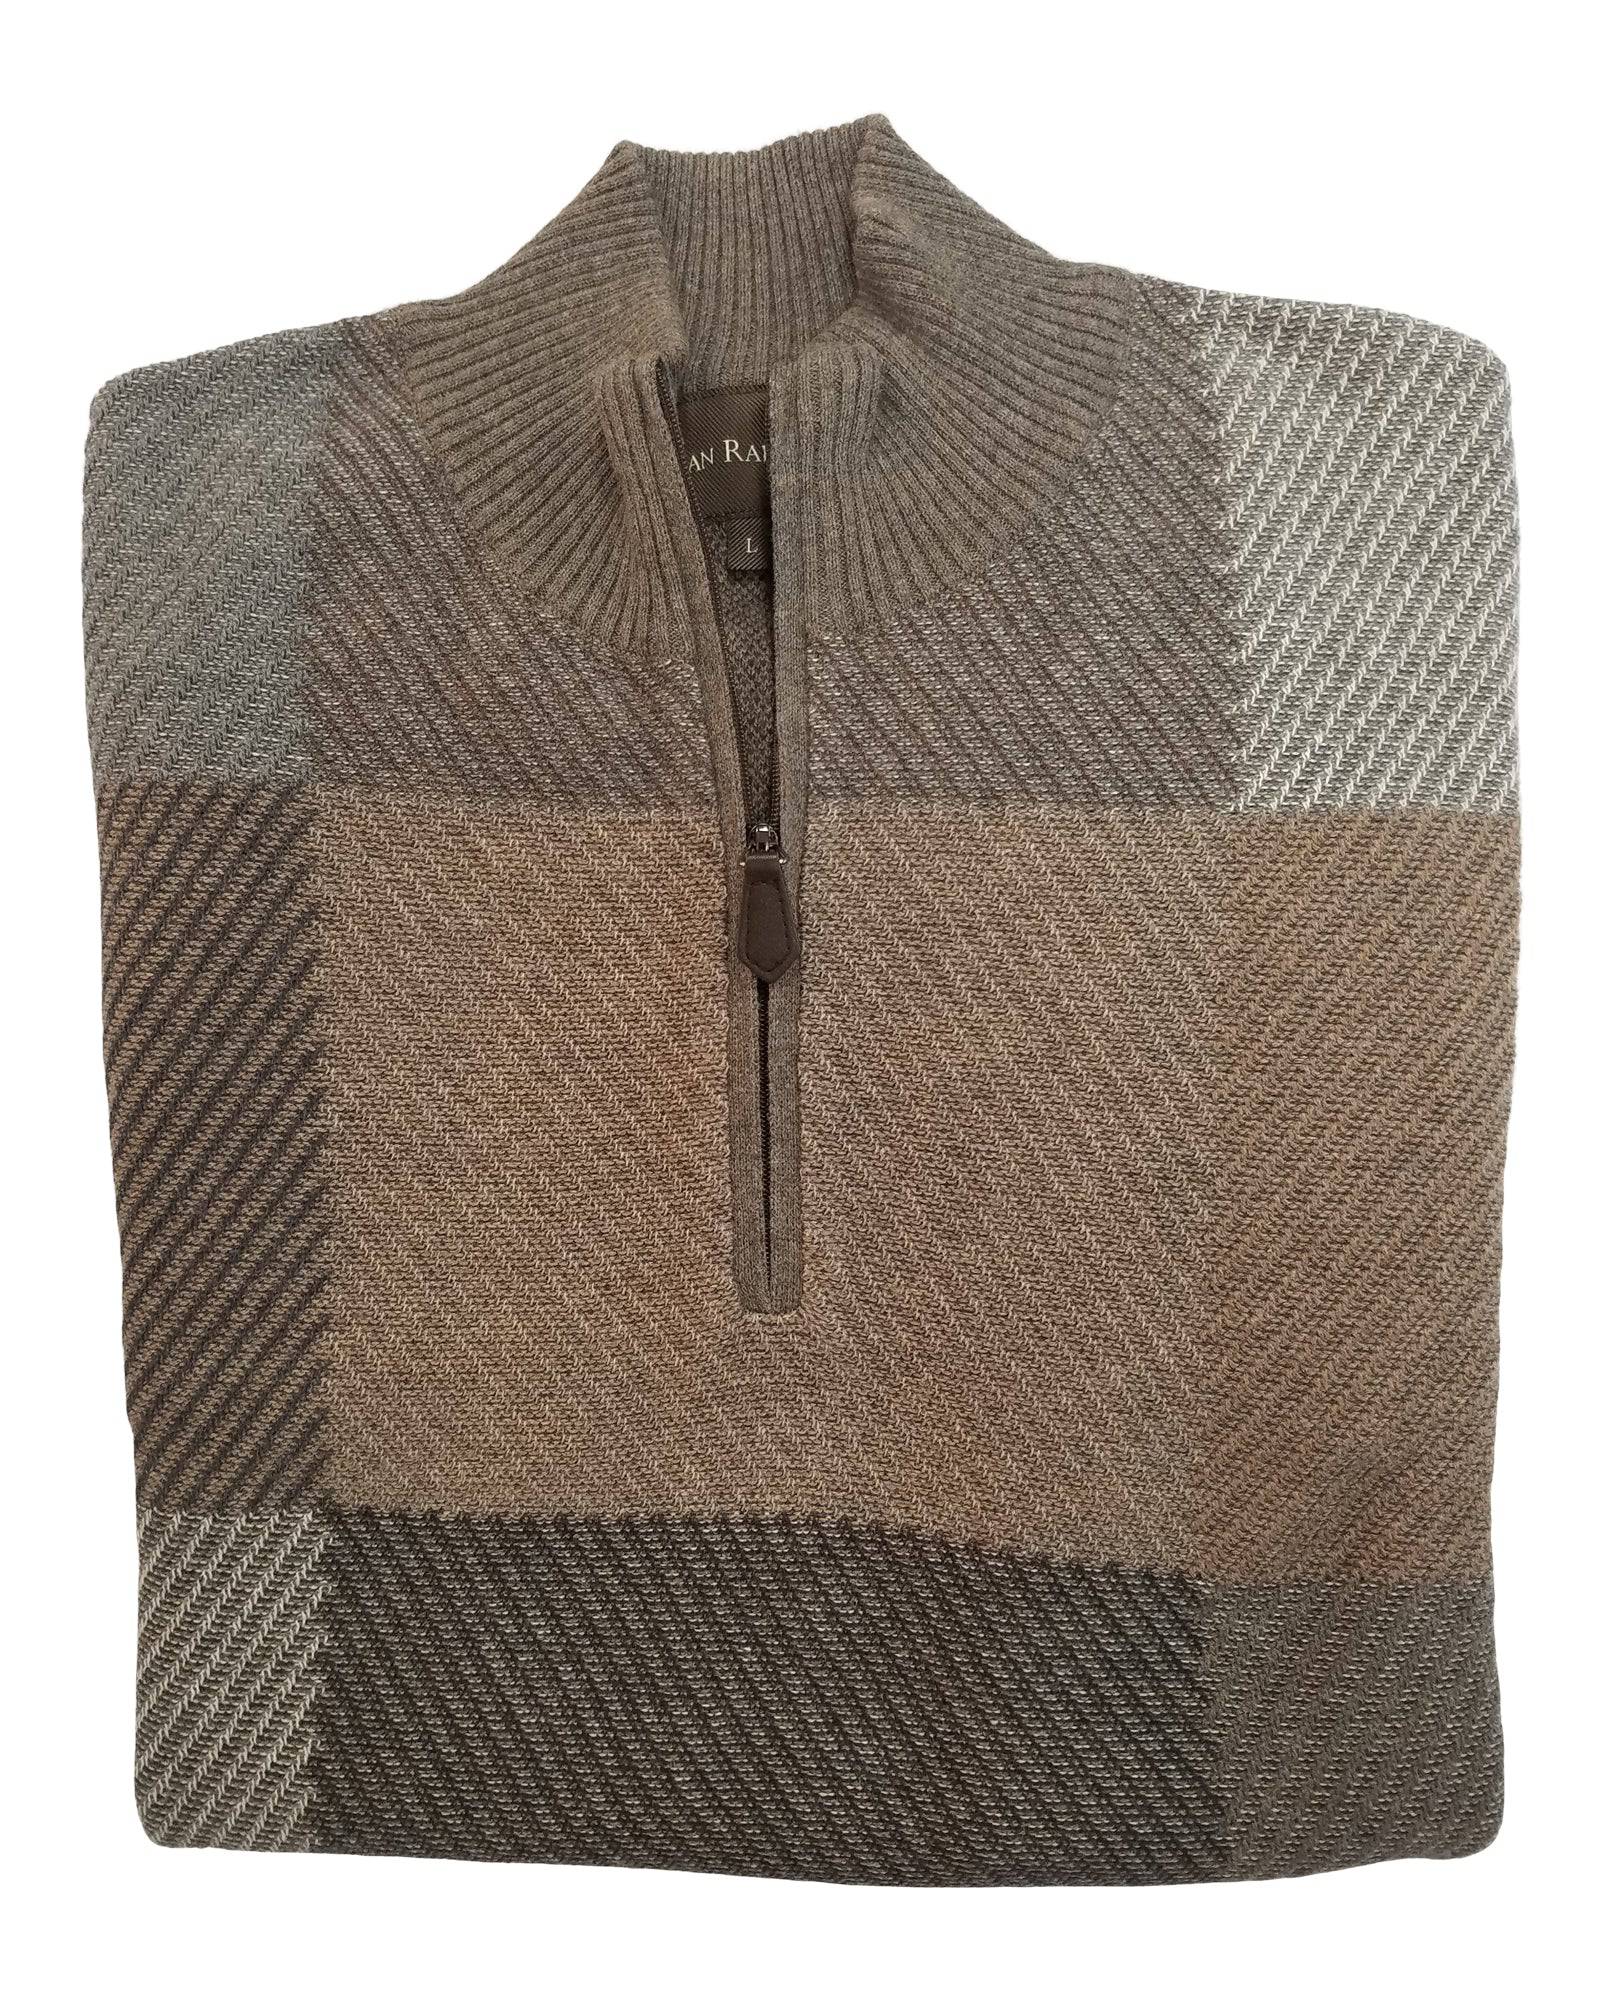 1/4 Zip Mock Sweater in Olive & Brown Square Pattern Cotton Blend - Rainwater's Men's Clothing and Tuxedo Rental